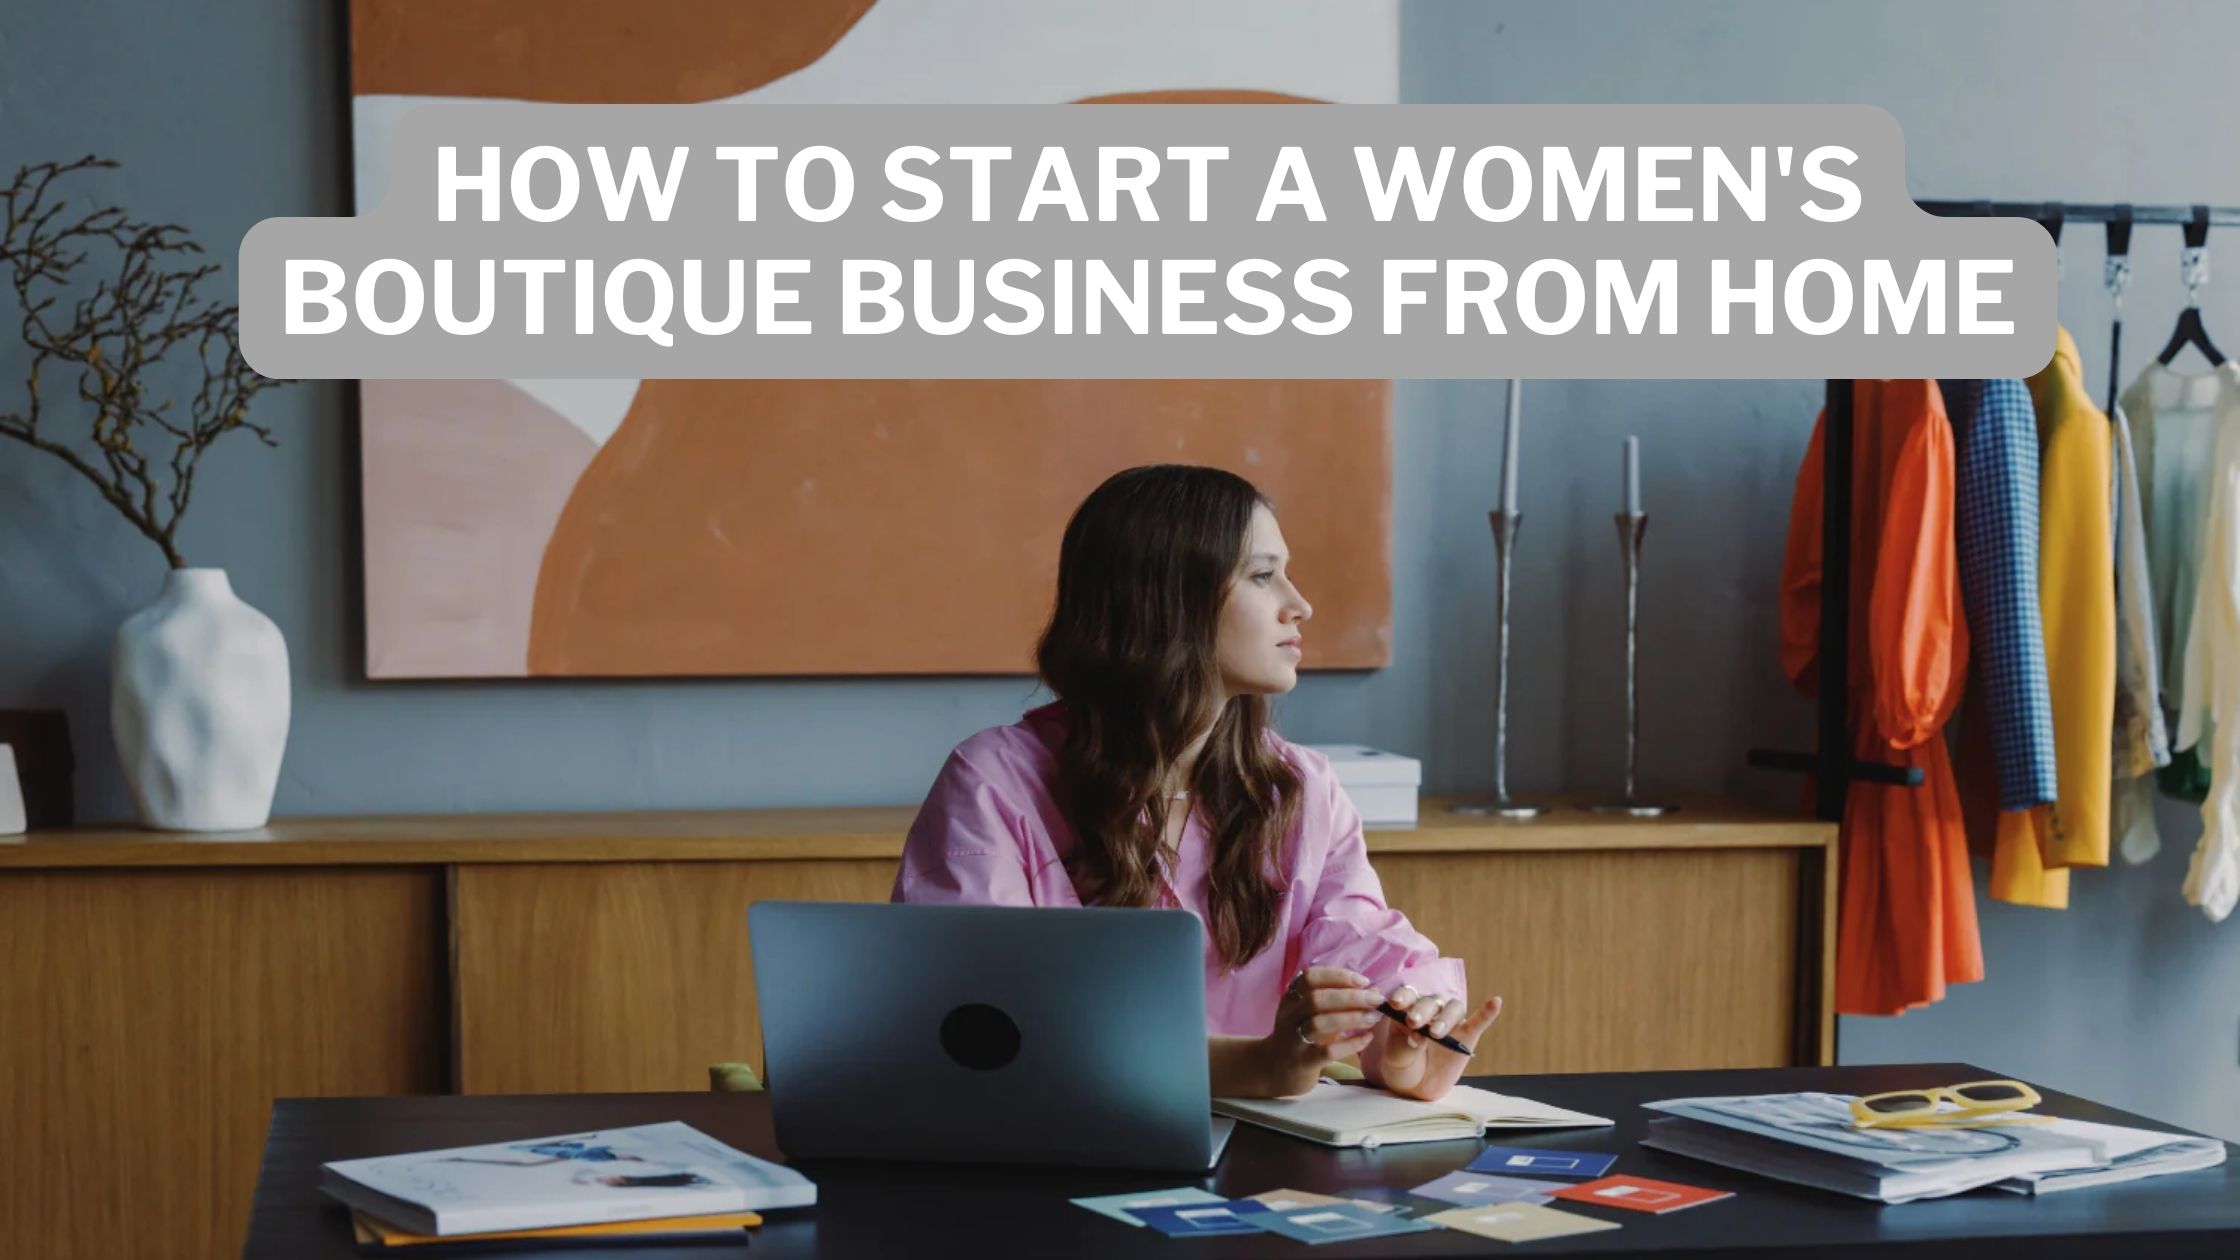 How To Start A Women's Boutique Business From Home